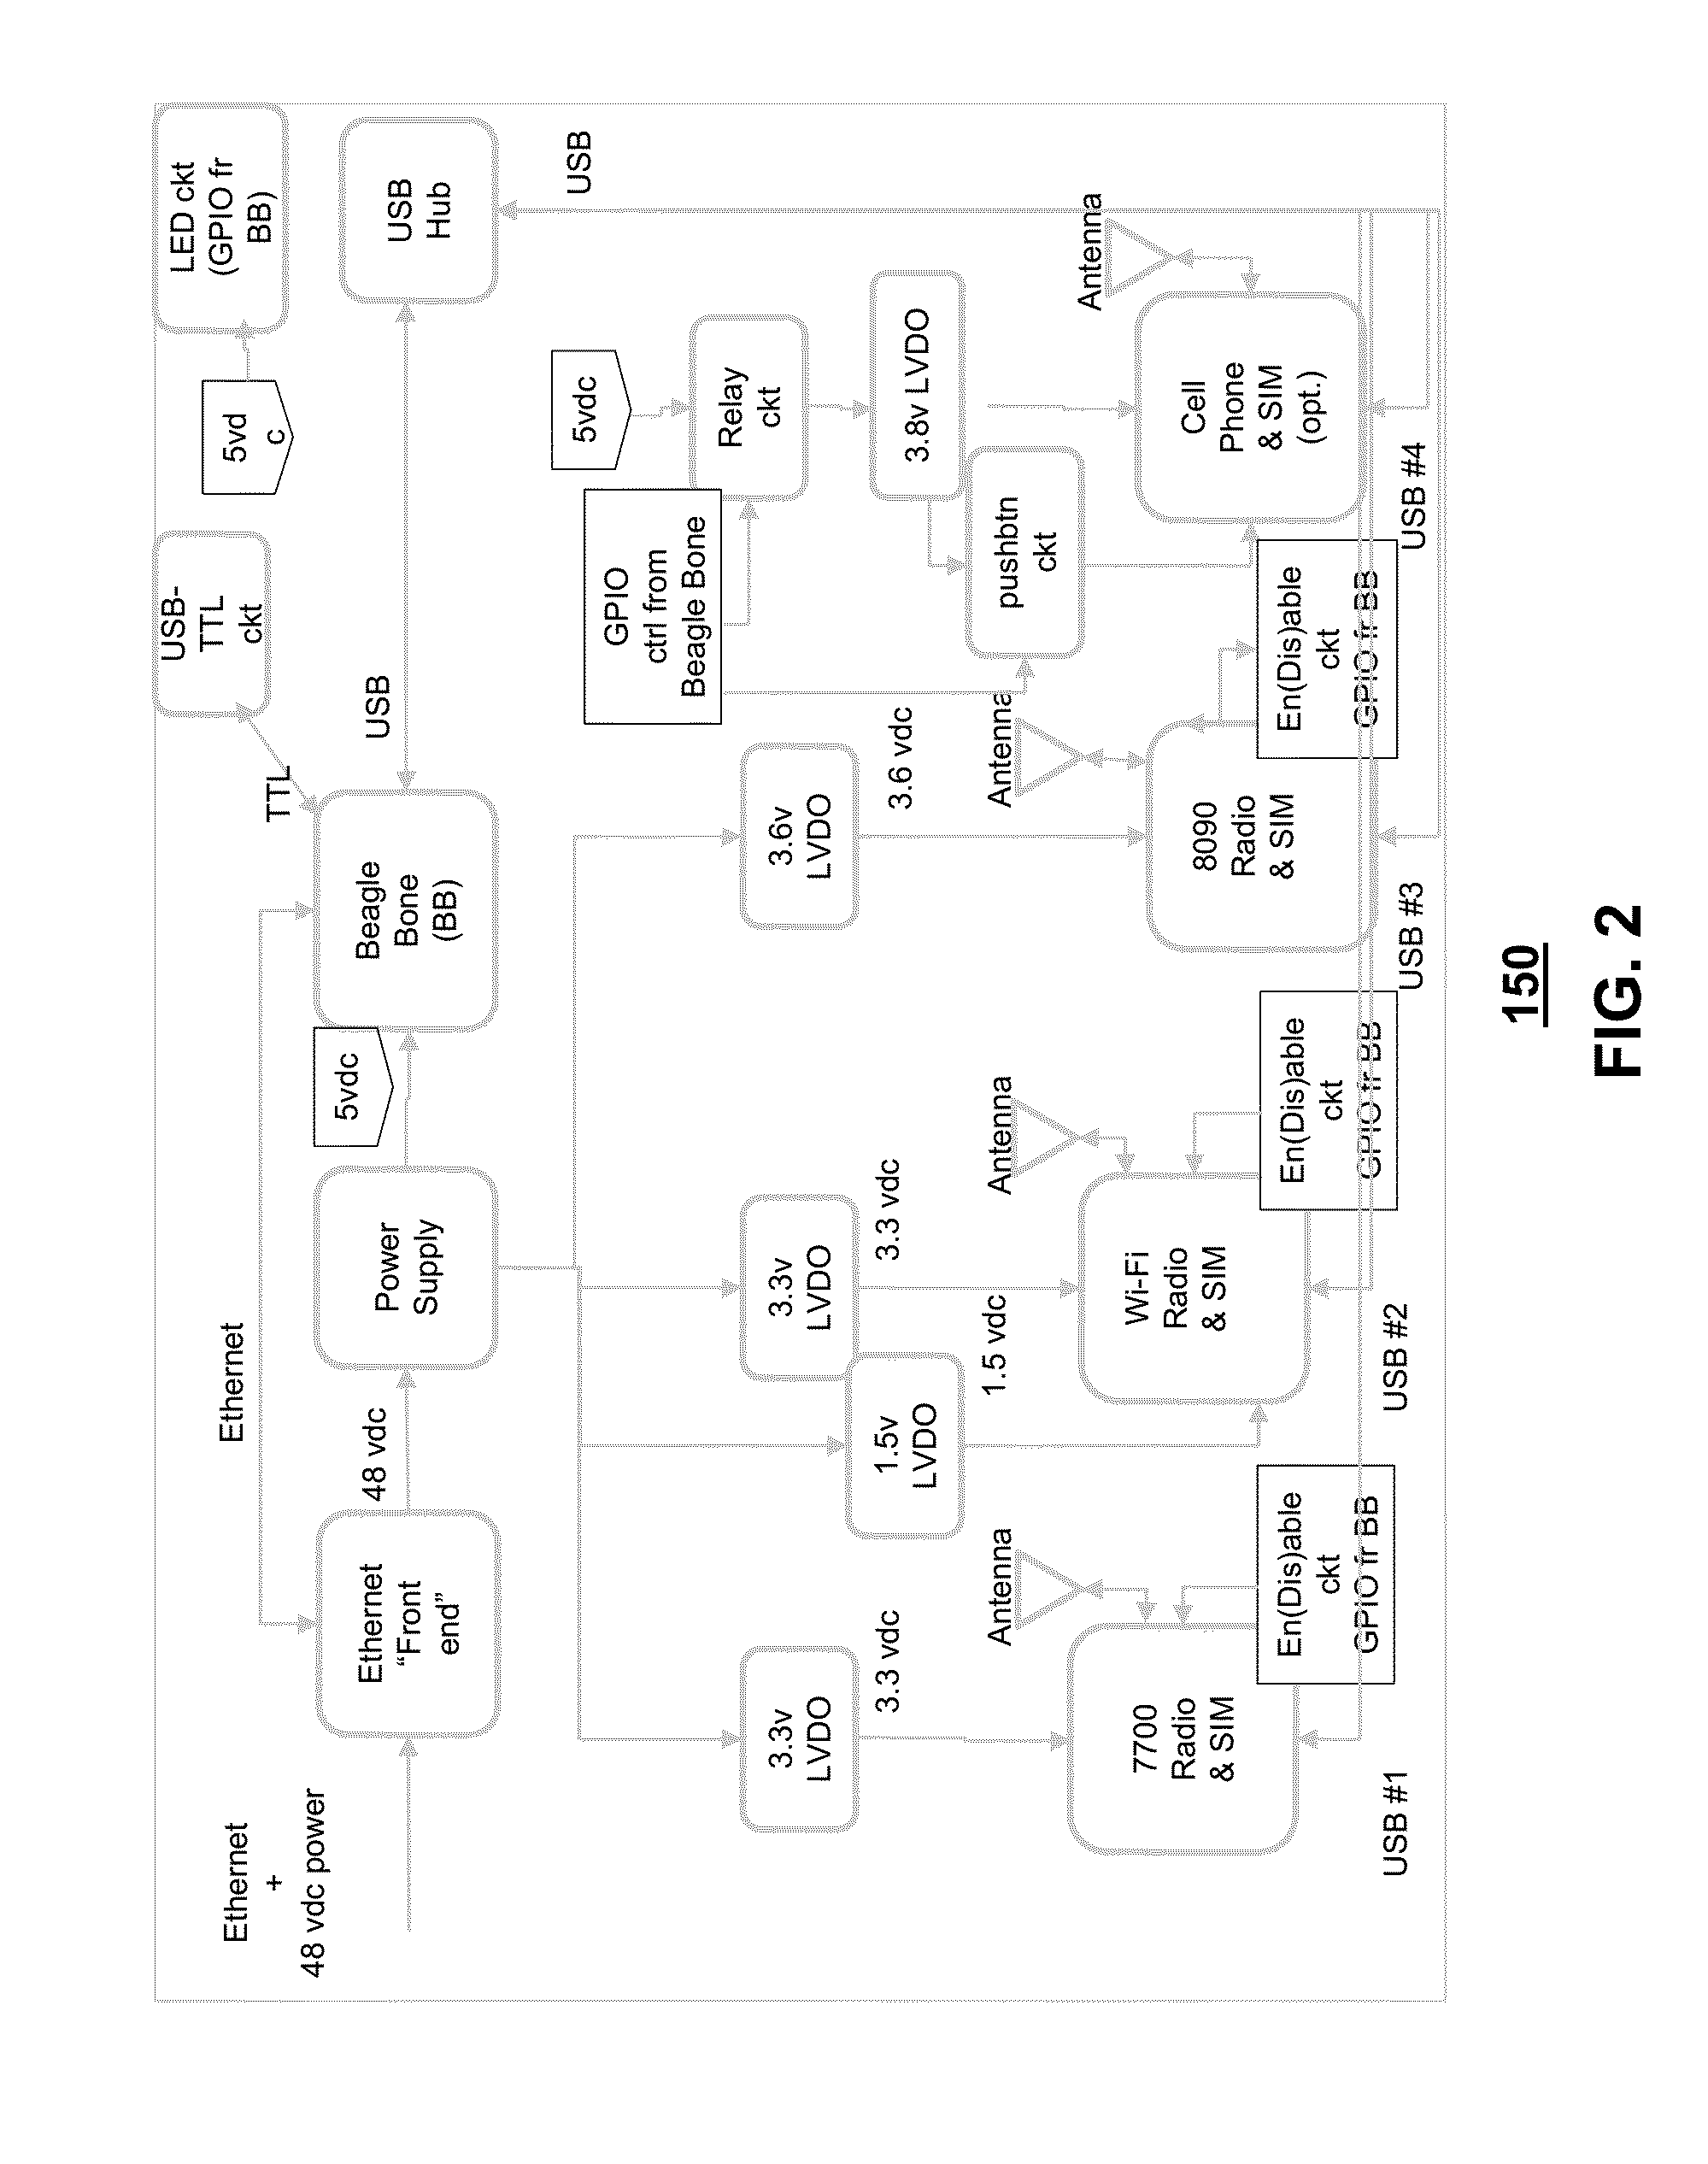 Method and apparatus for monitoring and adjusting multiple communication services at a venue